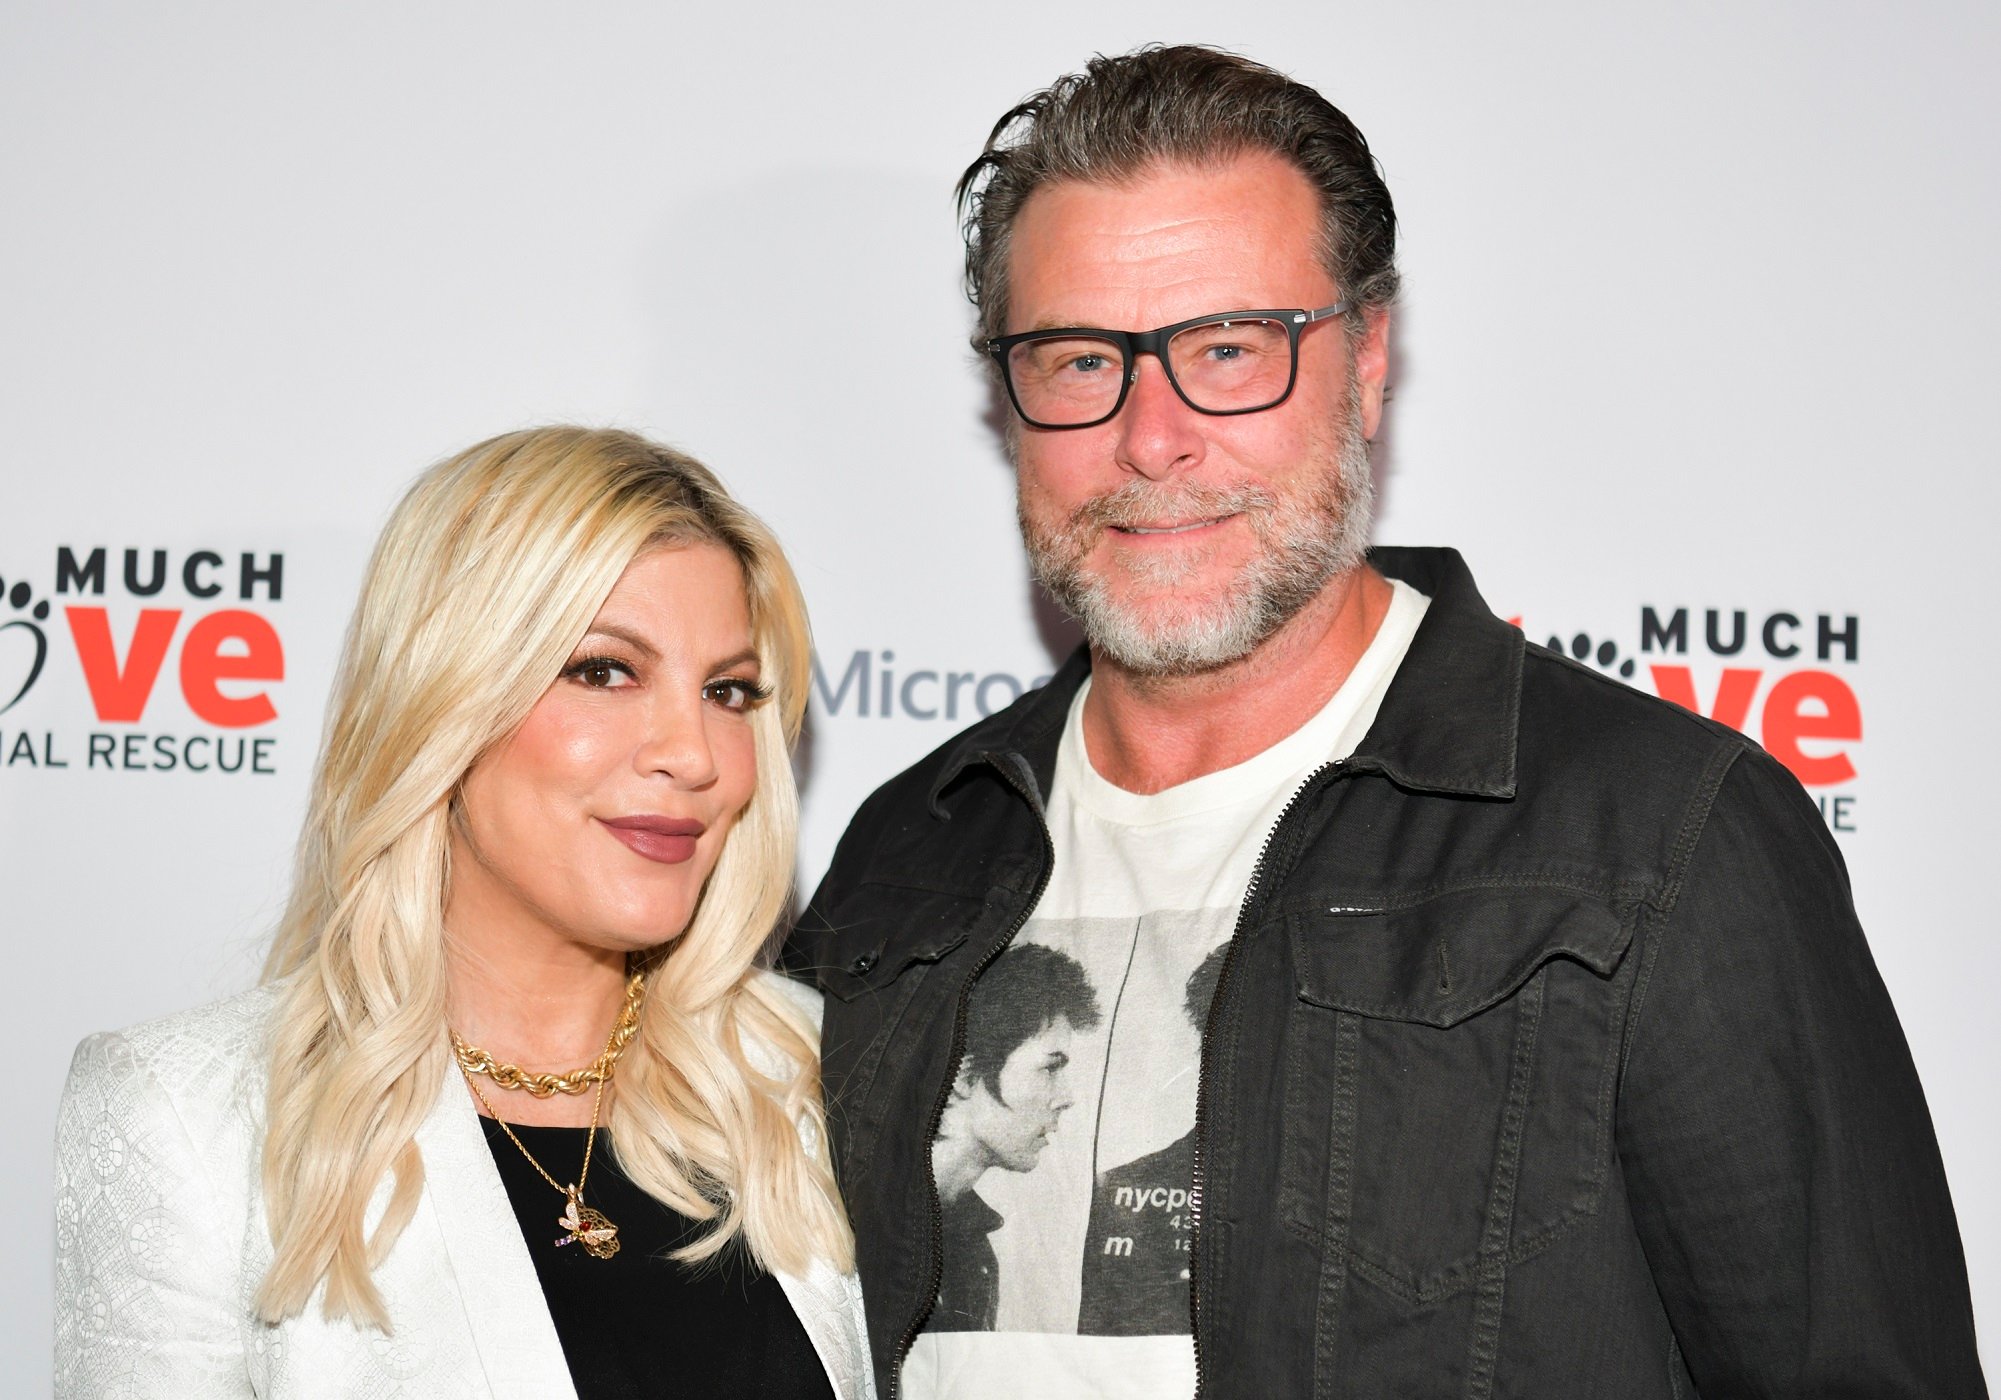 Tori Spelling and Dean McDermott pose for a photo after arriving at the Much Love Animal Rescue 3rd Annual Spoken Woof Benefit in 2019